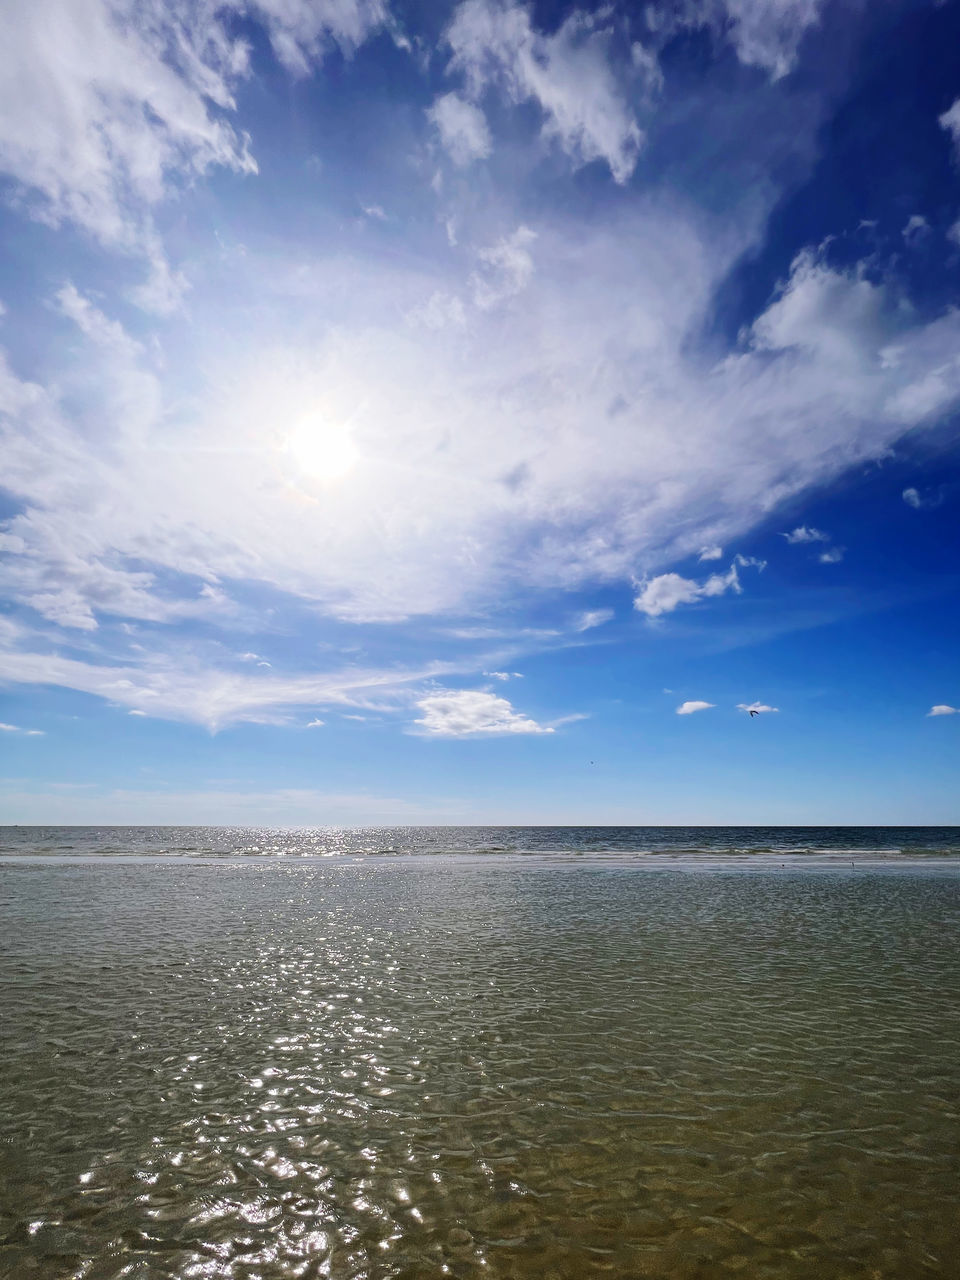 sky, horizon, water, sunlight, sea, cloud, scenics - nature, beauty in nature, reflection, ocean, nature, body of water, shore, blue, tranquility, environment, dusk, horizon over water, coast, tranquil scene, beach, land, no people, landscape, outdoors, wave, sun, morning, day, travel, seascape, sunrise, travel destinations, cloudscape, idyllic, summer, urban skyline, sunbeam